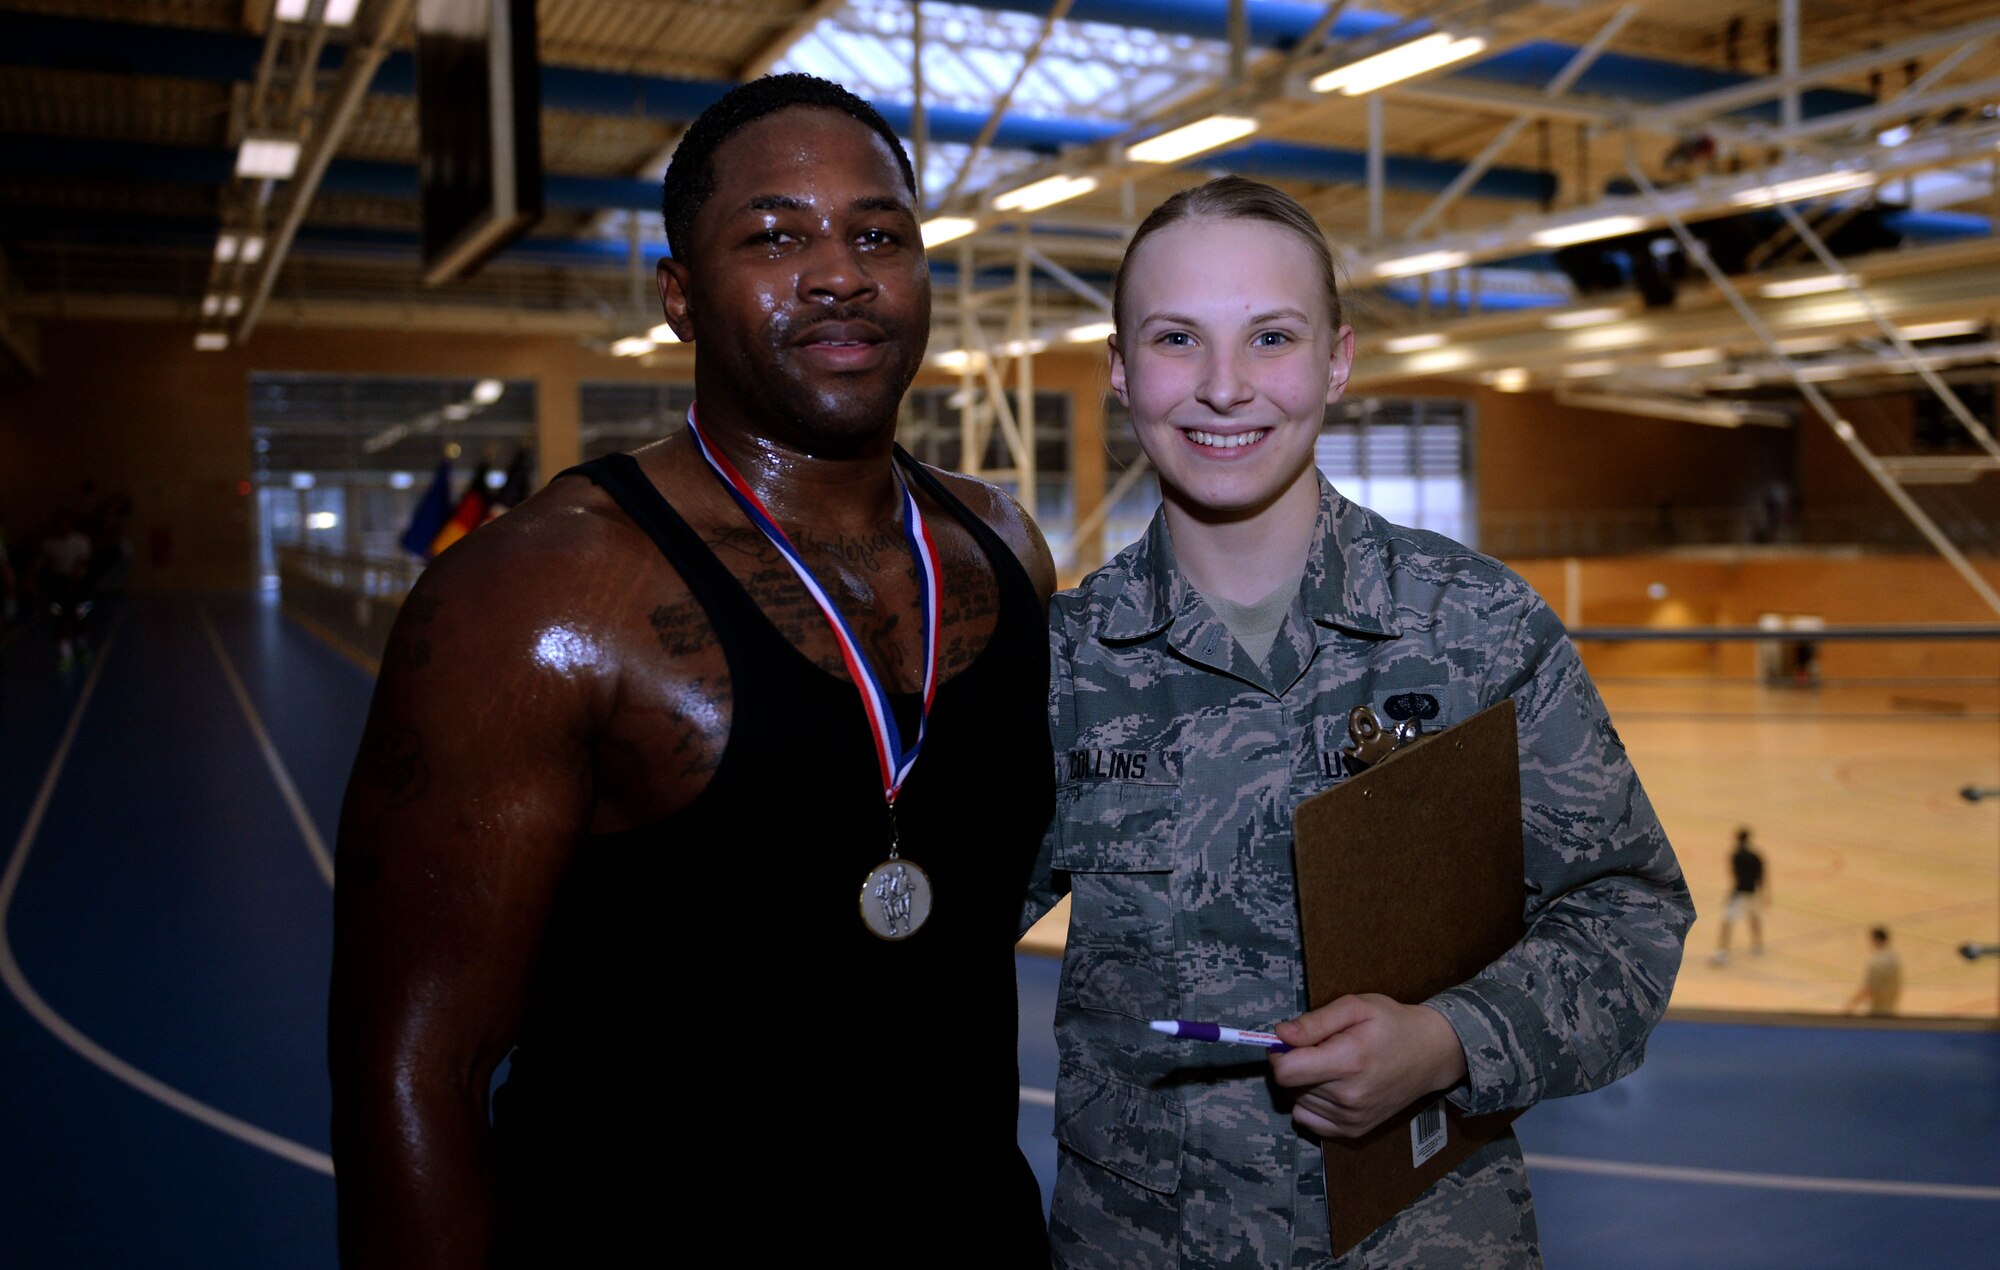 U.S. Air Force Staff Sgt. Christopher Dennis, 52nd Maintenance Group maintenance management analysis NCO in charge, left, and U.S. Air Force Airman Kimberly Collins, 52nd Force Support Squadron fitness apprentice, right, pose together after Turbo-Charged Challenge #3 in the Eifel Powerhaus at Spangdahlem Air Base, Germany, Feb. 10, 2015.  Dennis earned a Saber Accomplishment Medal from Collins for participating in and completing all three of the Turbo-Charged Challenges. (U.S. Air Force photo by Airman 1st Class Timothy Kim/Released)